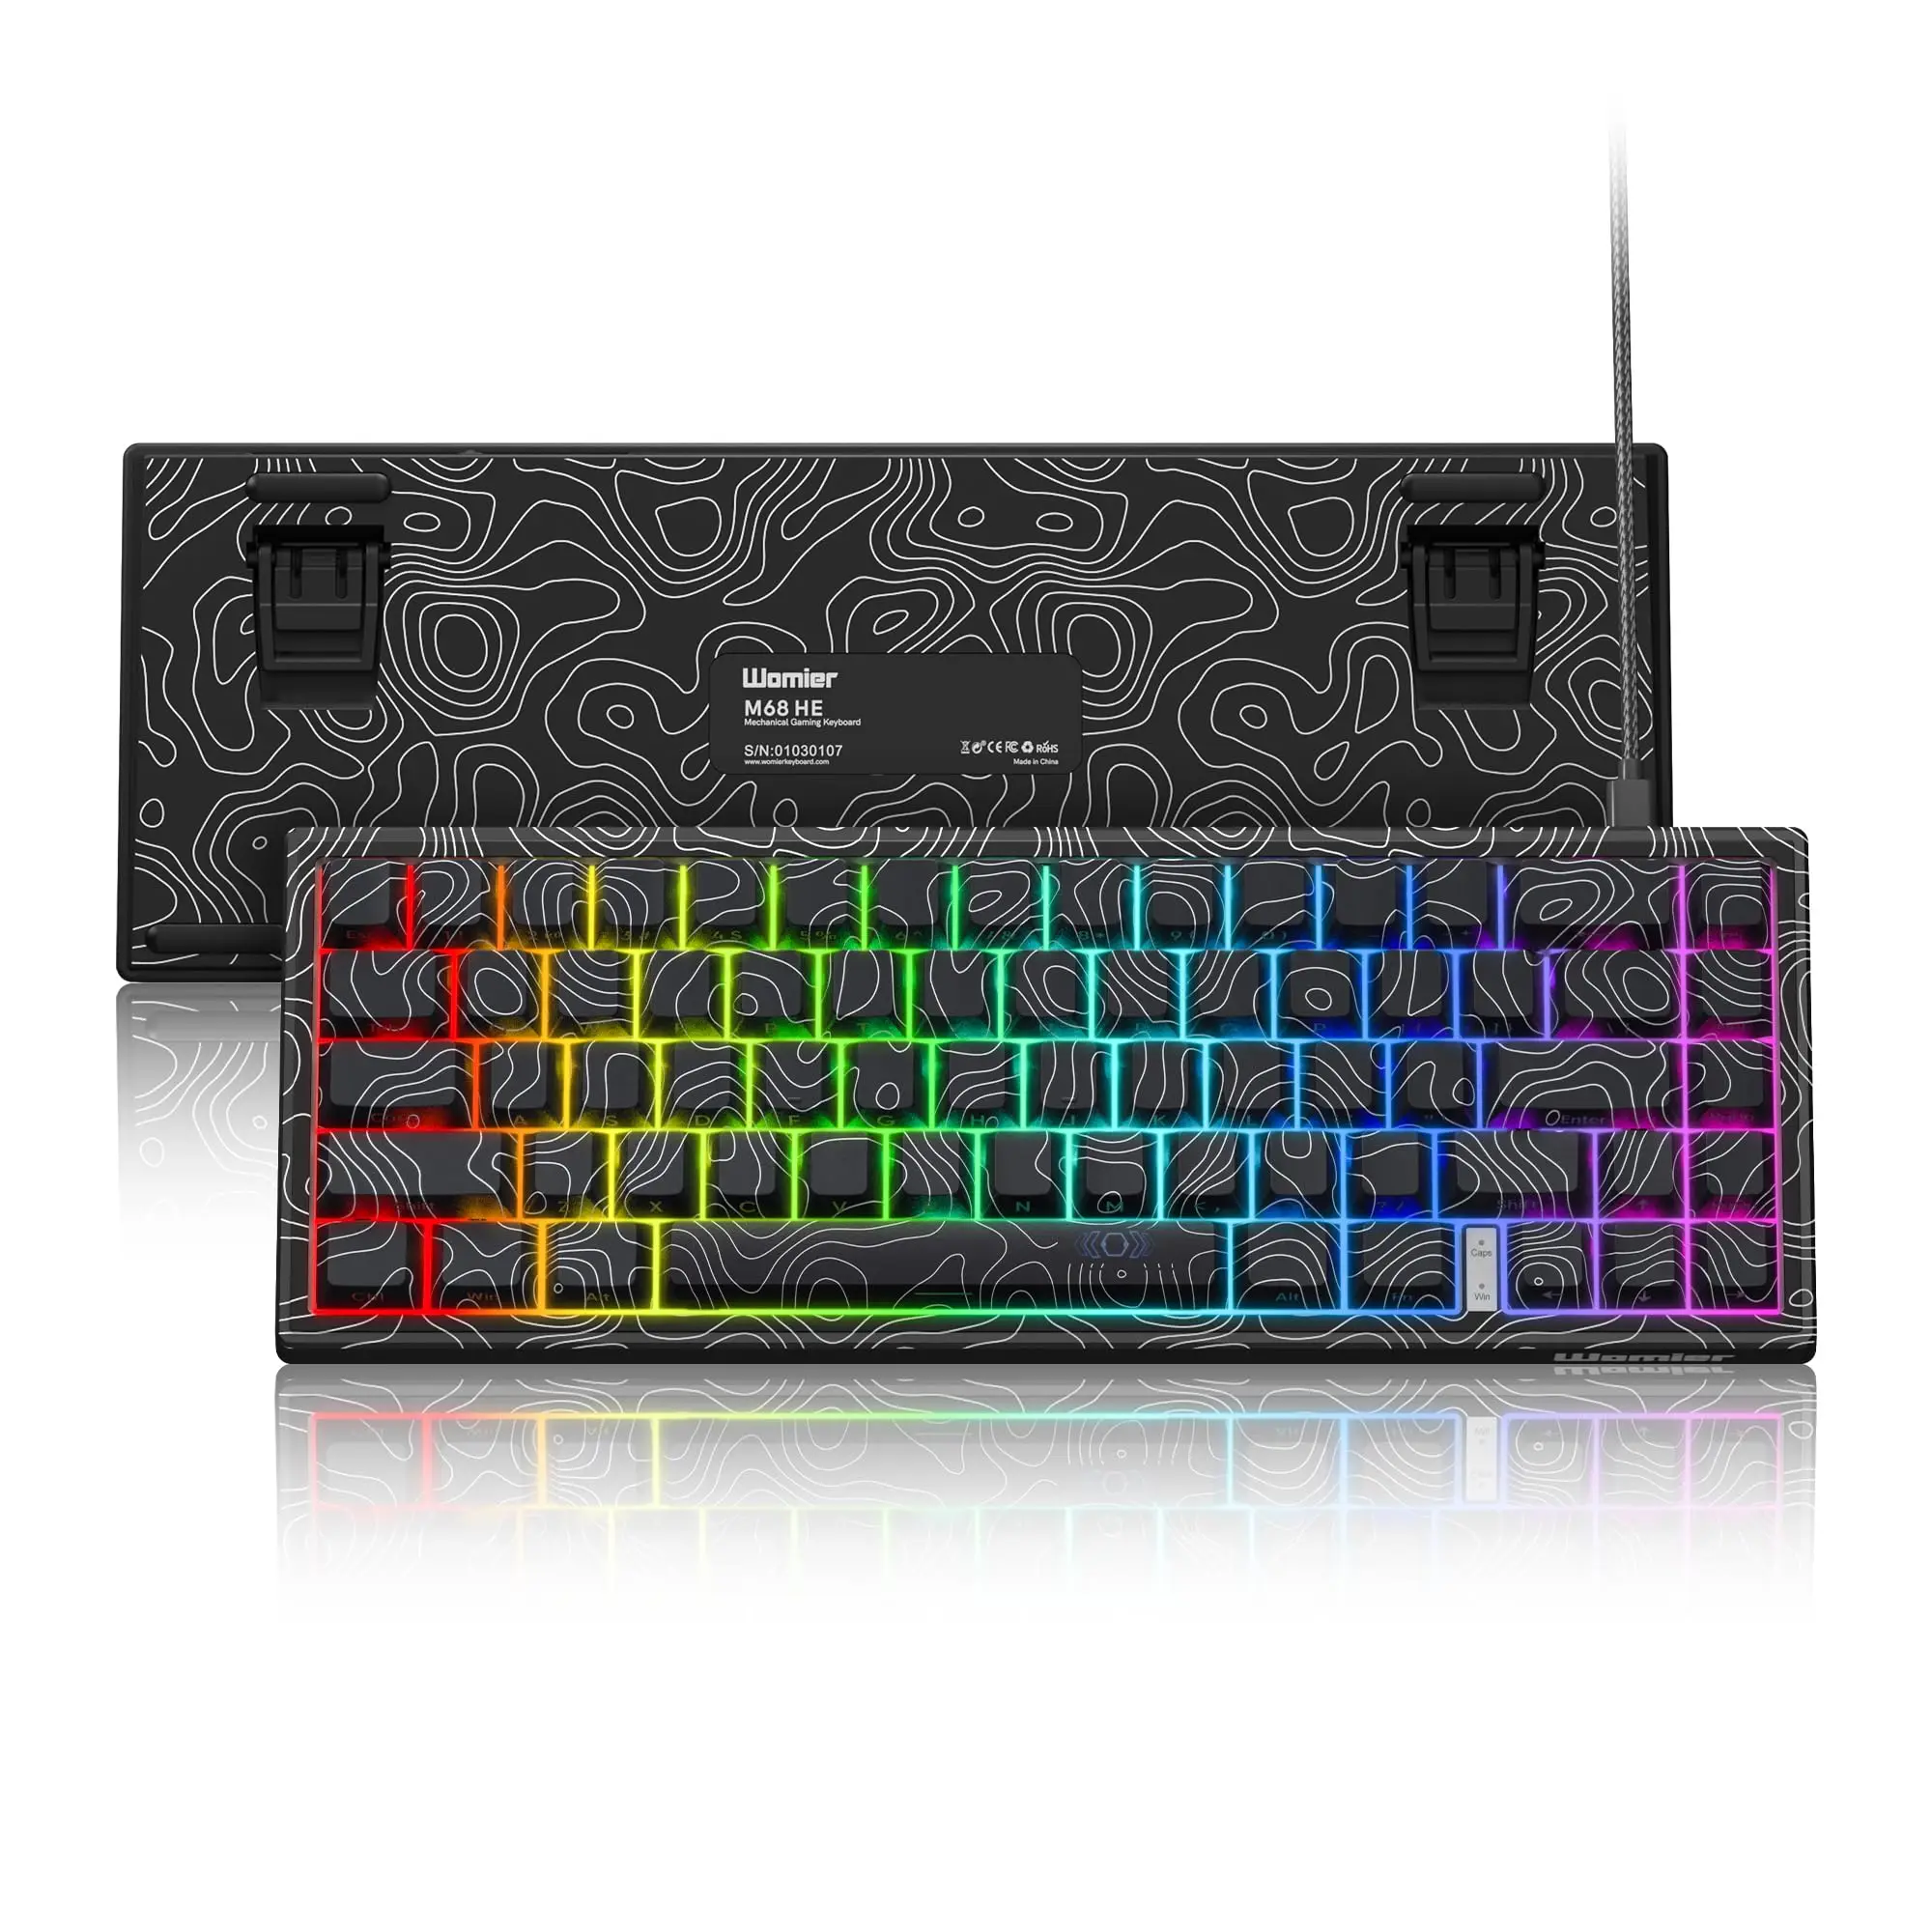 

Womier M68 HE 65% Black Rapid Trigger Gaming Mechanical Keyboard Topographic RGB Wired Gasket Mounted Keyboard Magnetic Switch